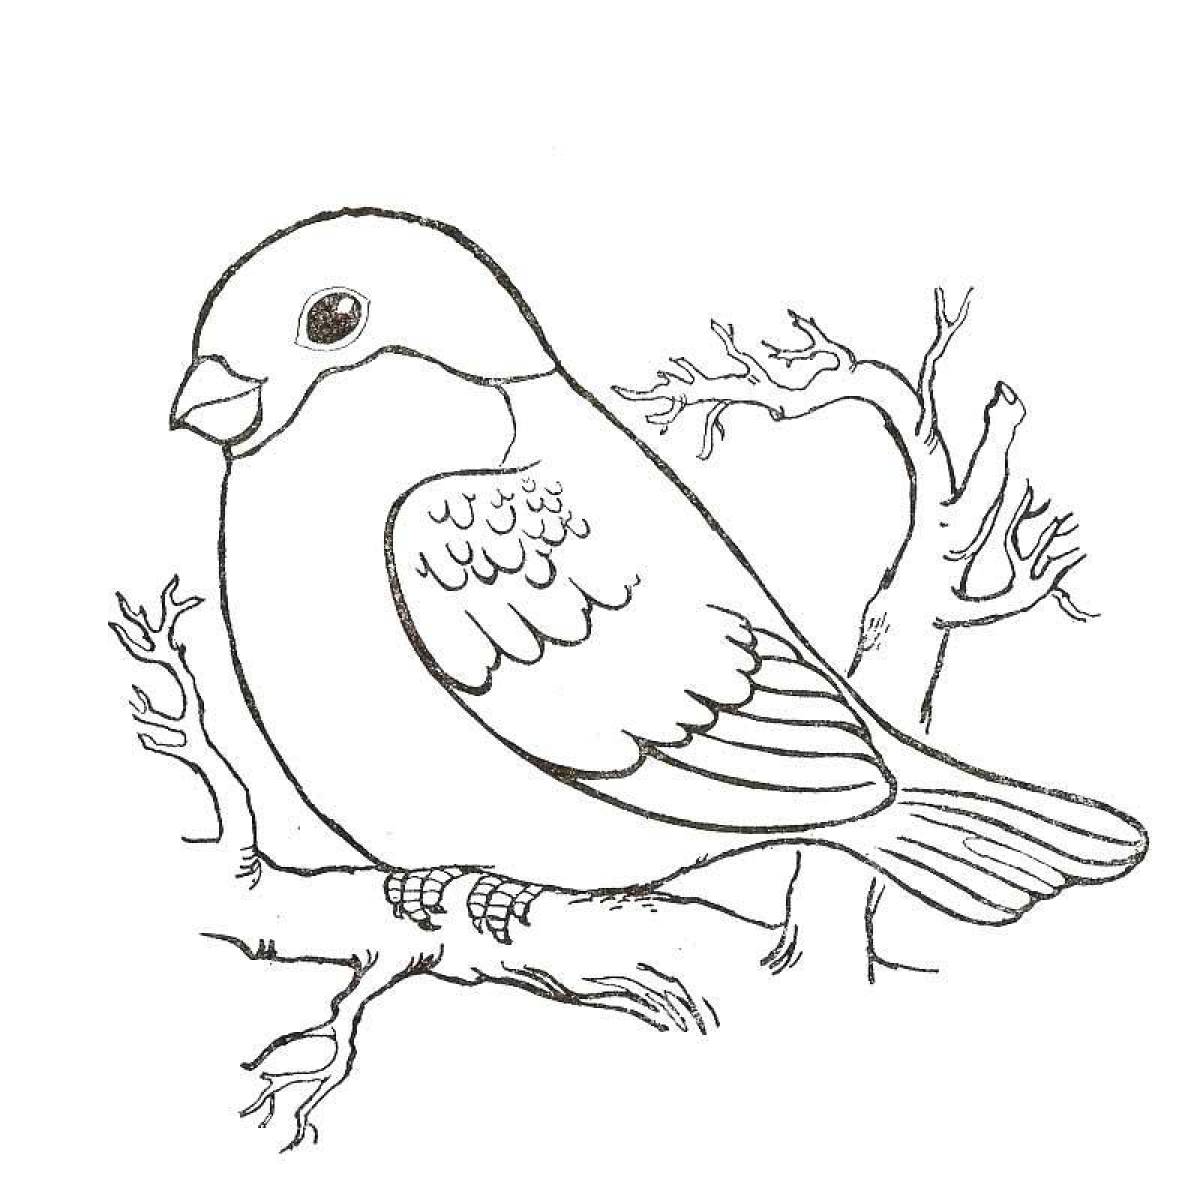 Coloring book festive wintering birds for children 4-5 years old